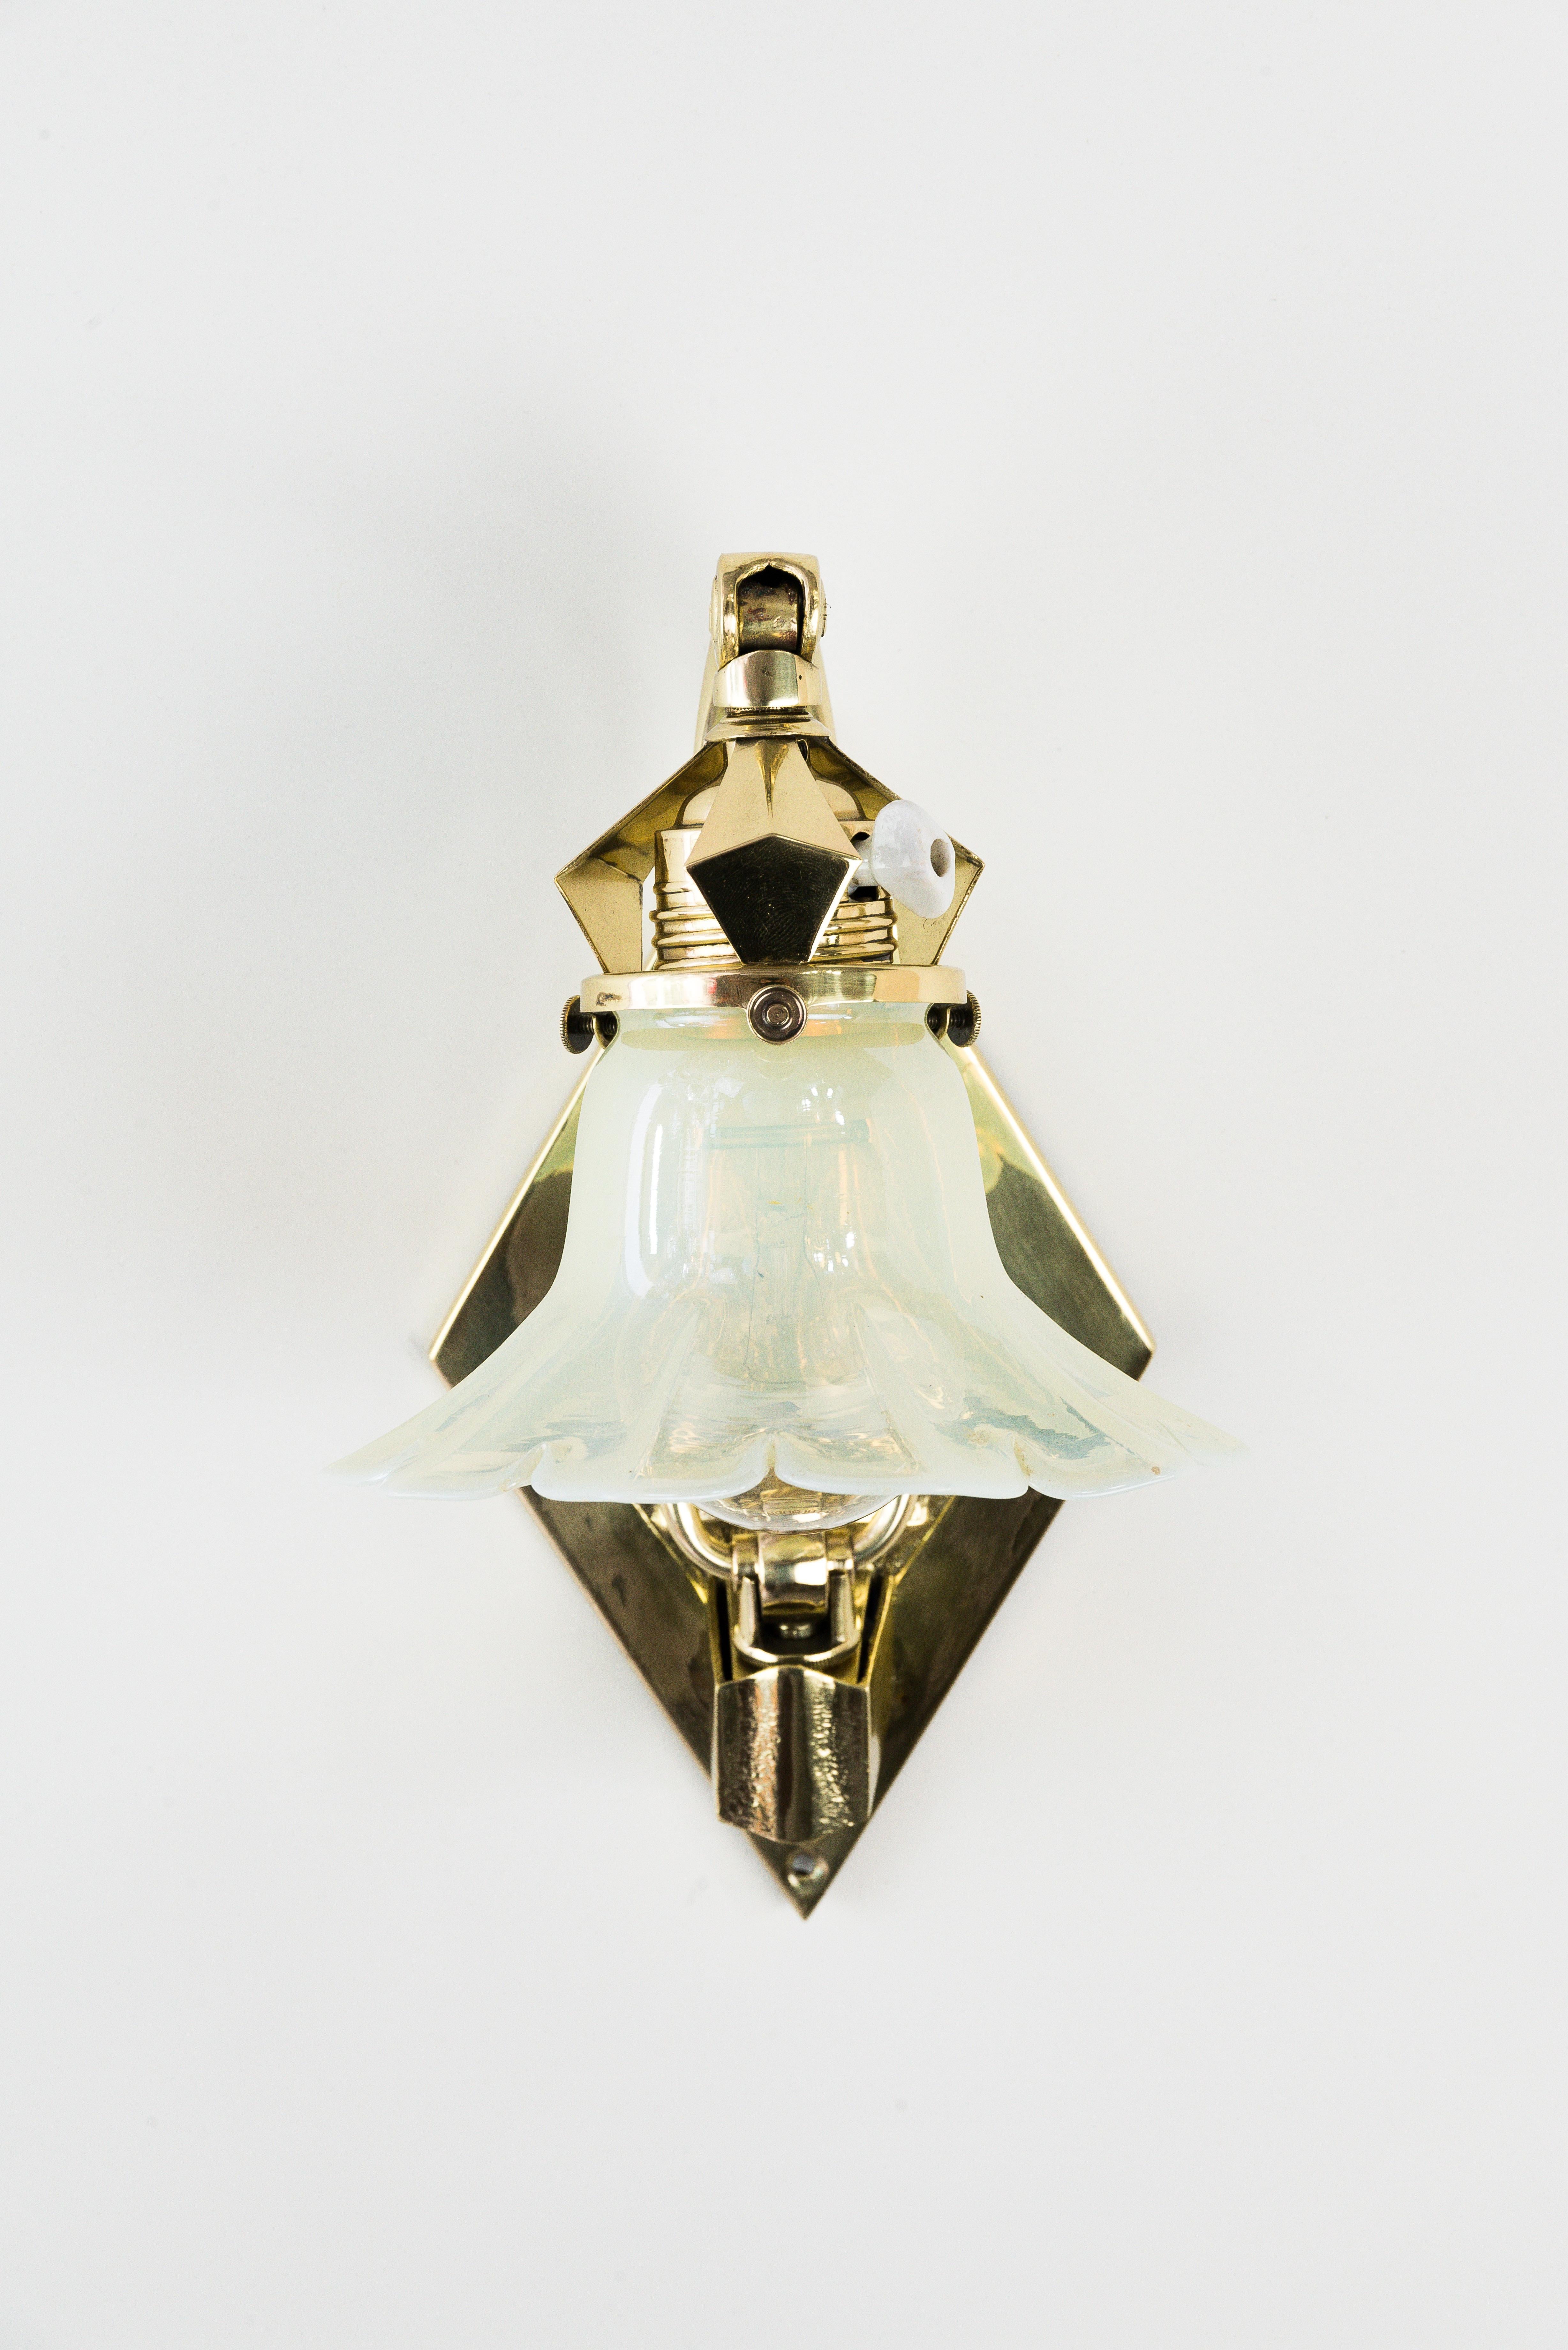 Adjustable Art Deco Wall Lamp circa 1920s with Opaline Glass Shade 3